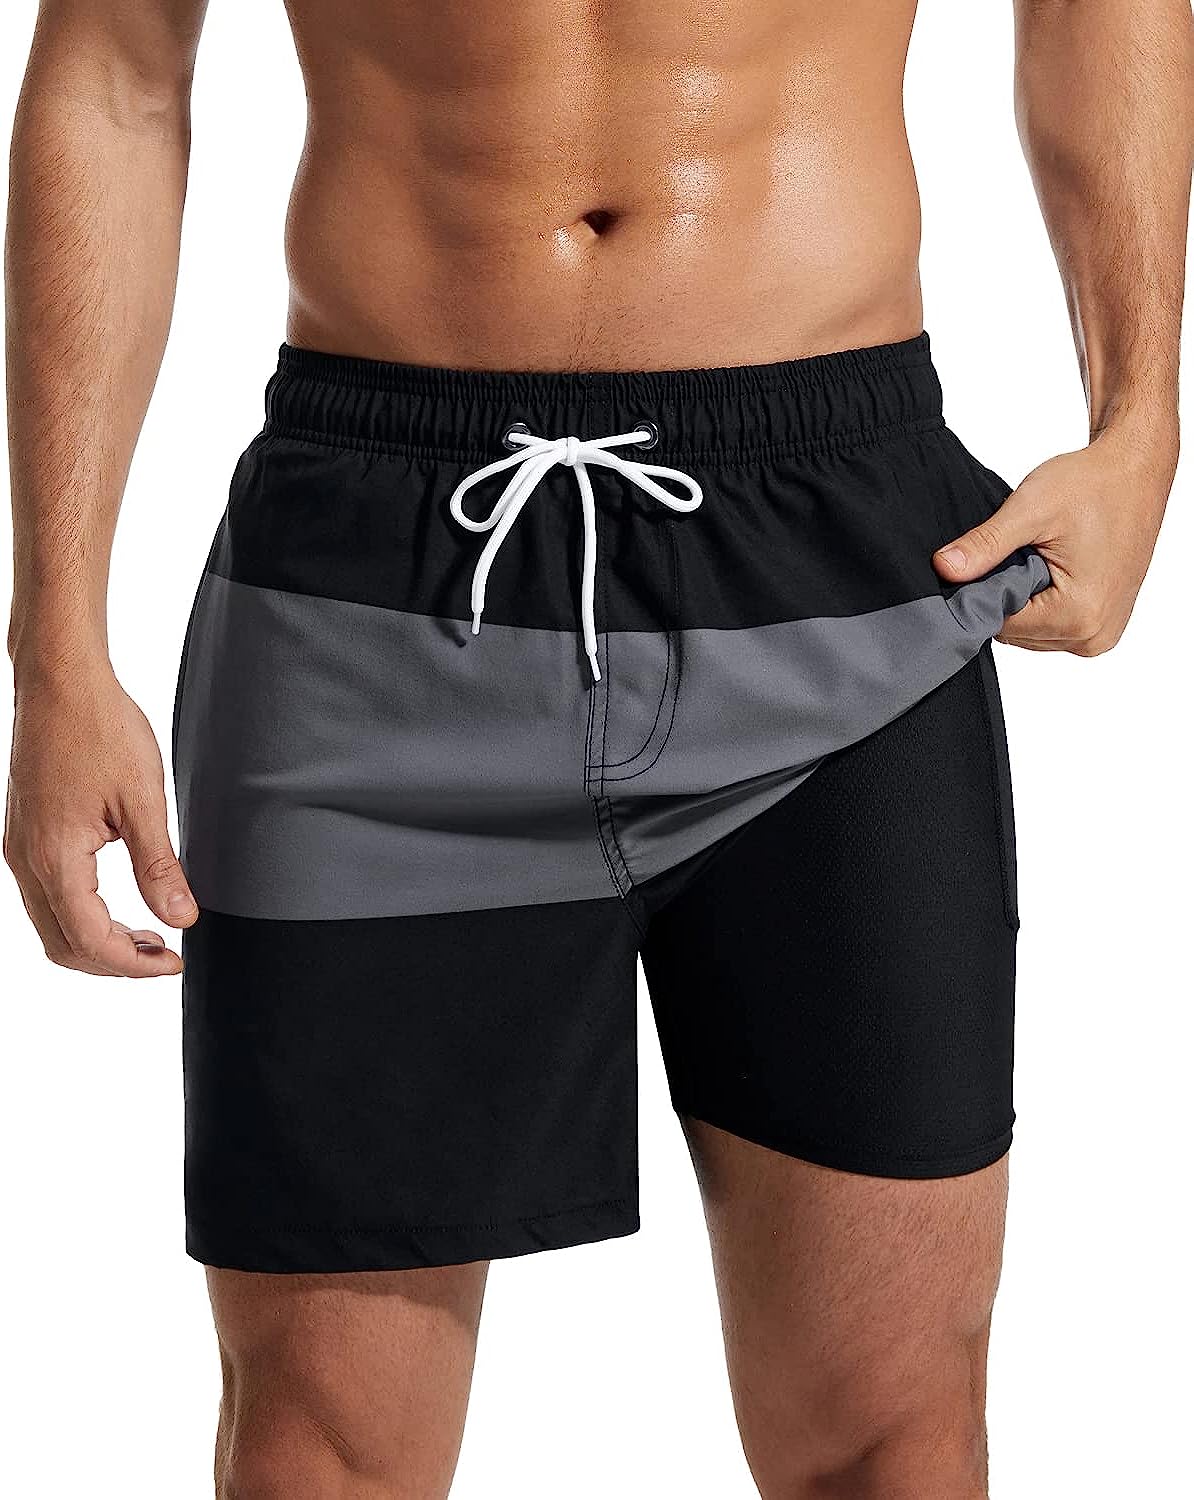 Swimming Shorts Men, Swimming Trunks With Compression Liner 2 In 1